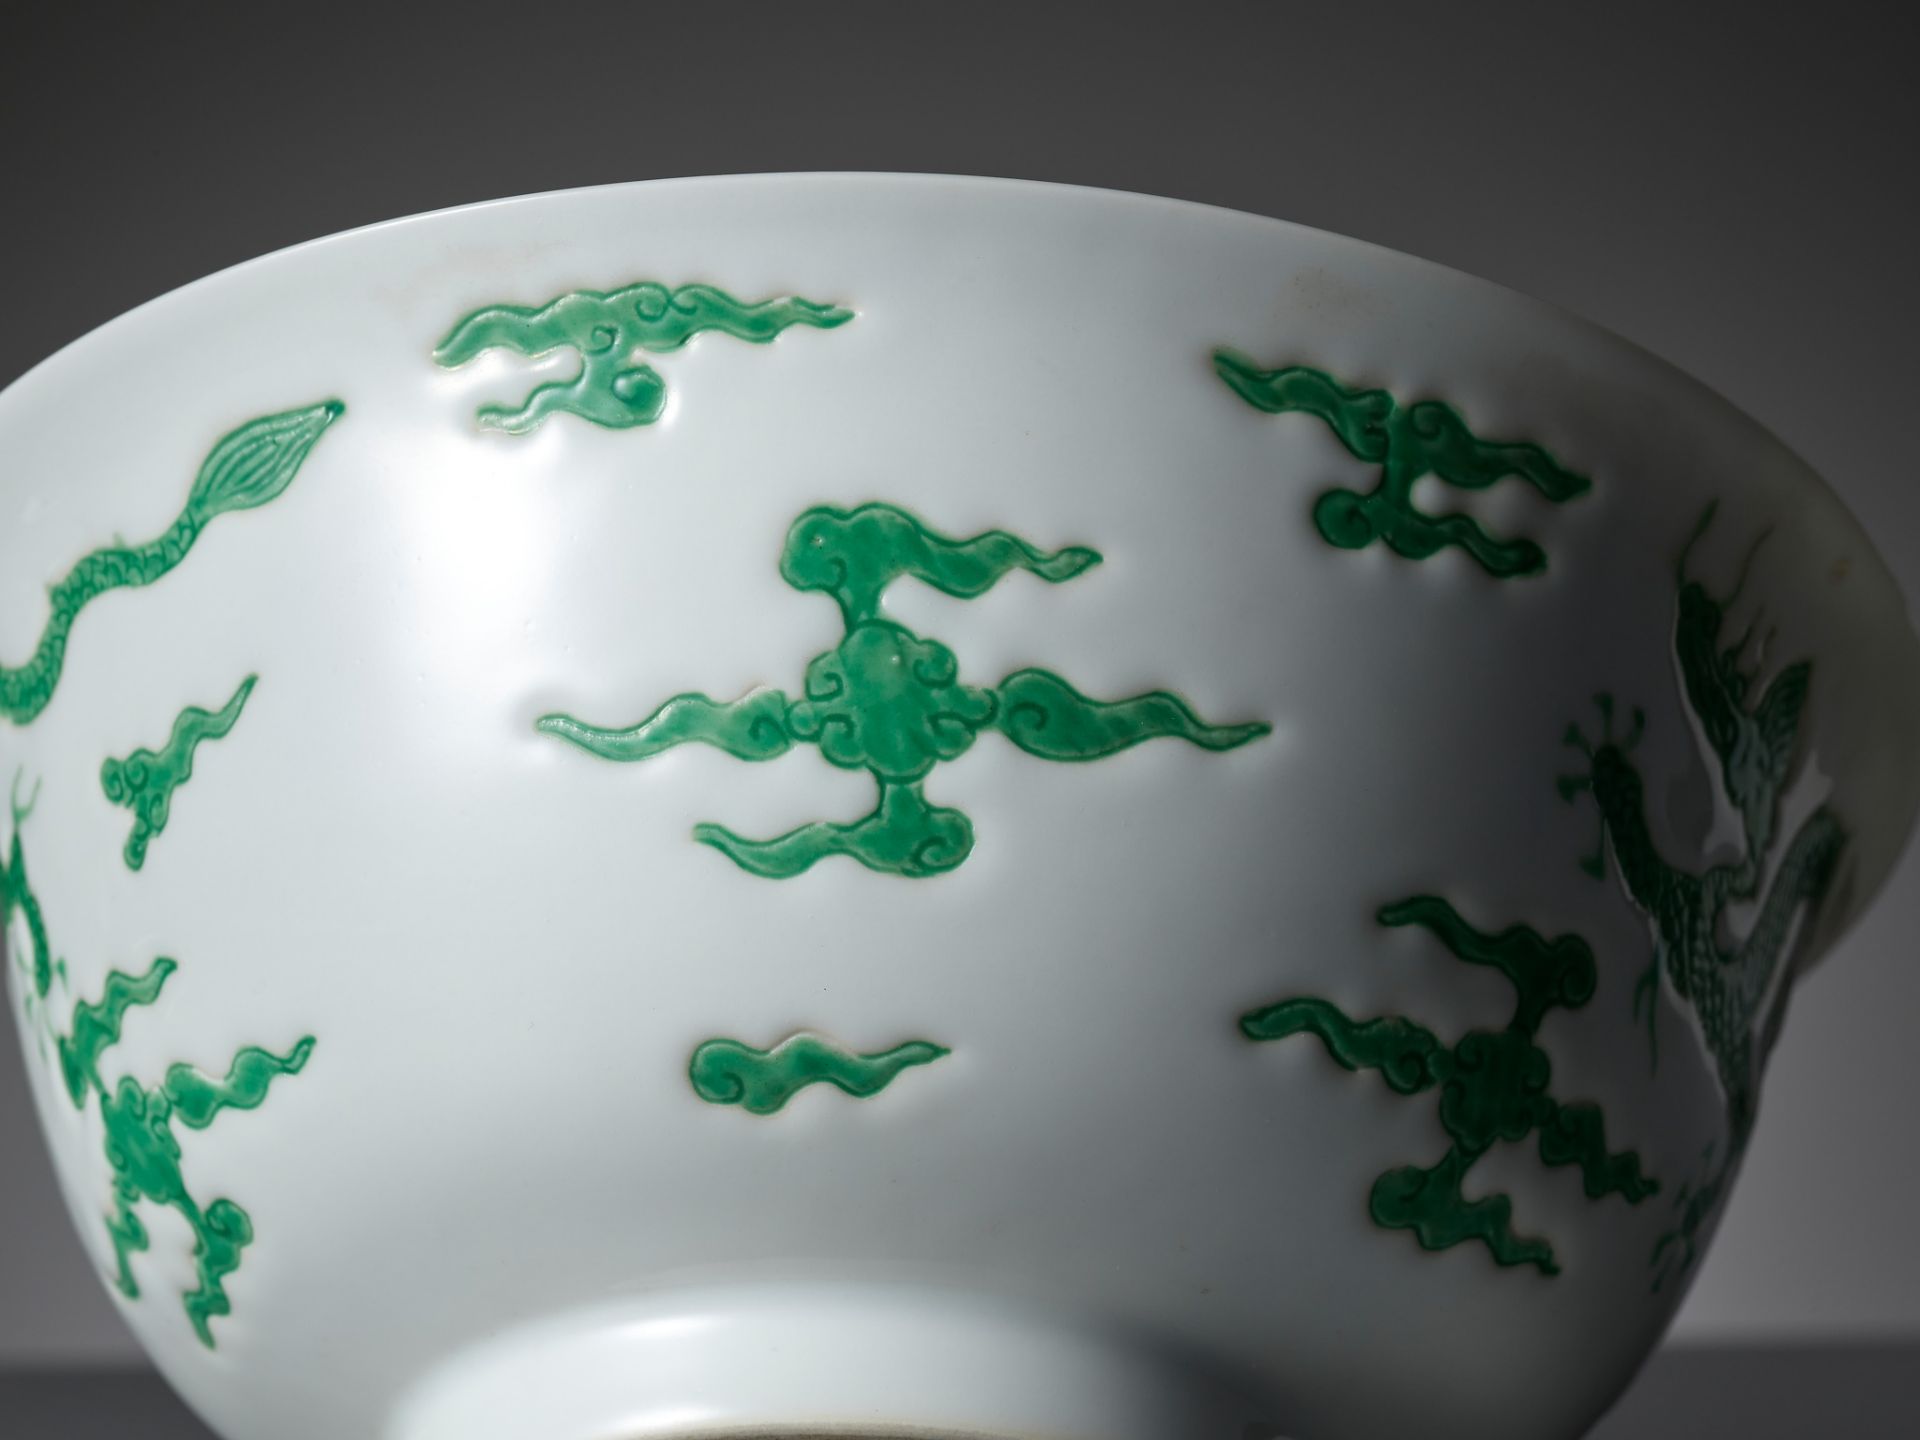 A RARE PAIR OF MING-STYLE GREEN-ENAMELED 'DRAGON' BOWLS, KANGXI PERIOD - Image 17 of 18